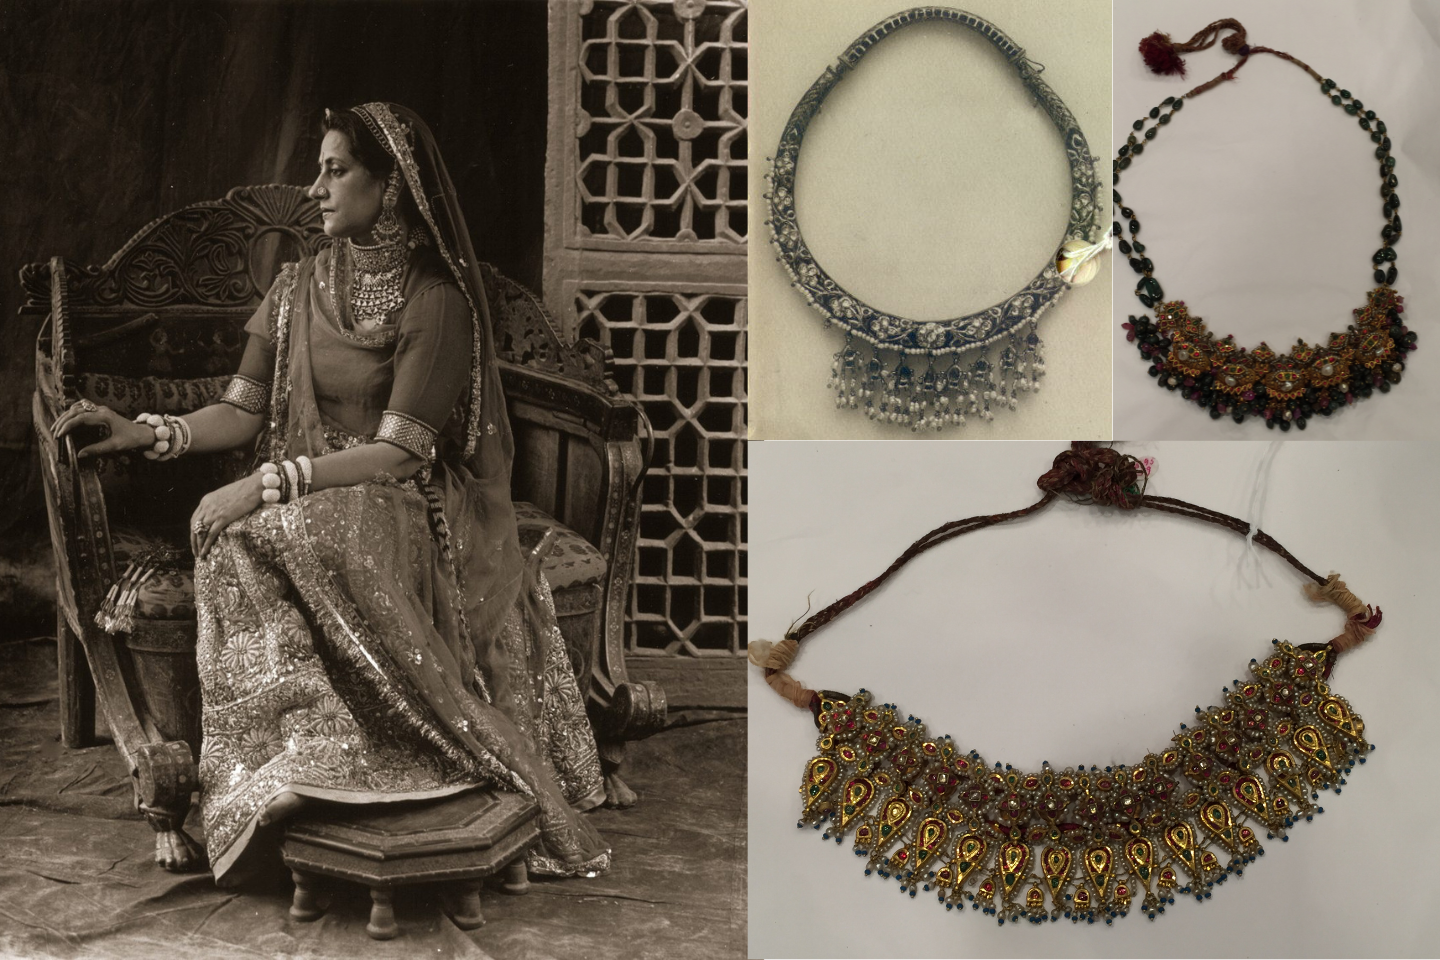 Traditional Indian necklaces from the west